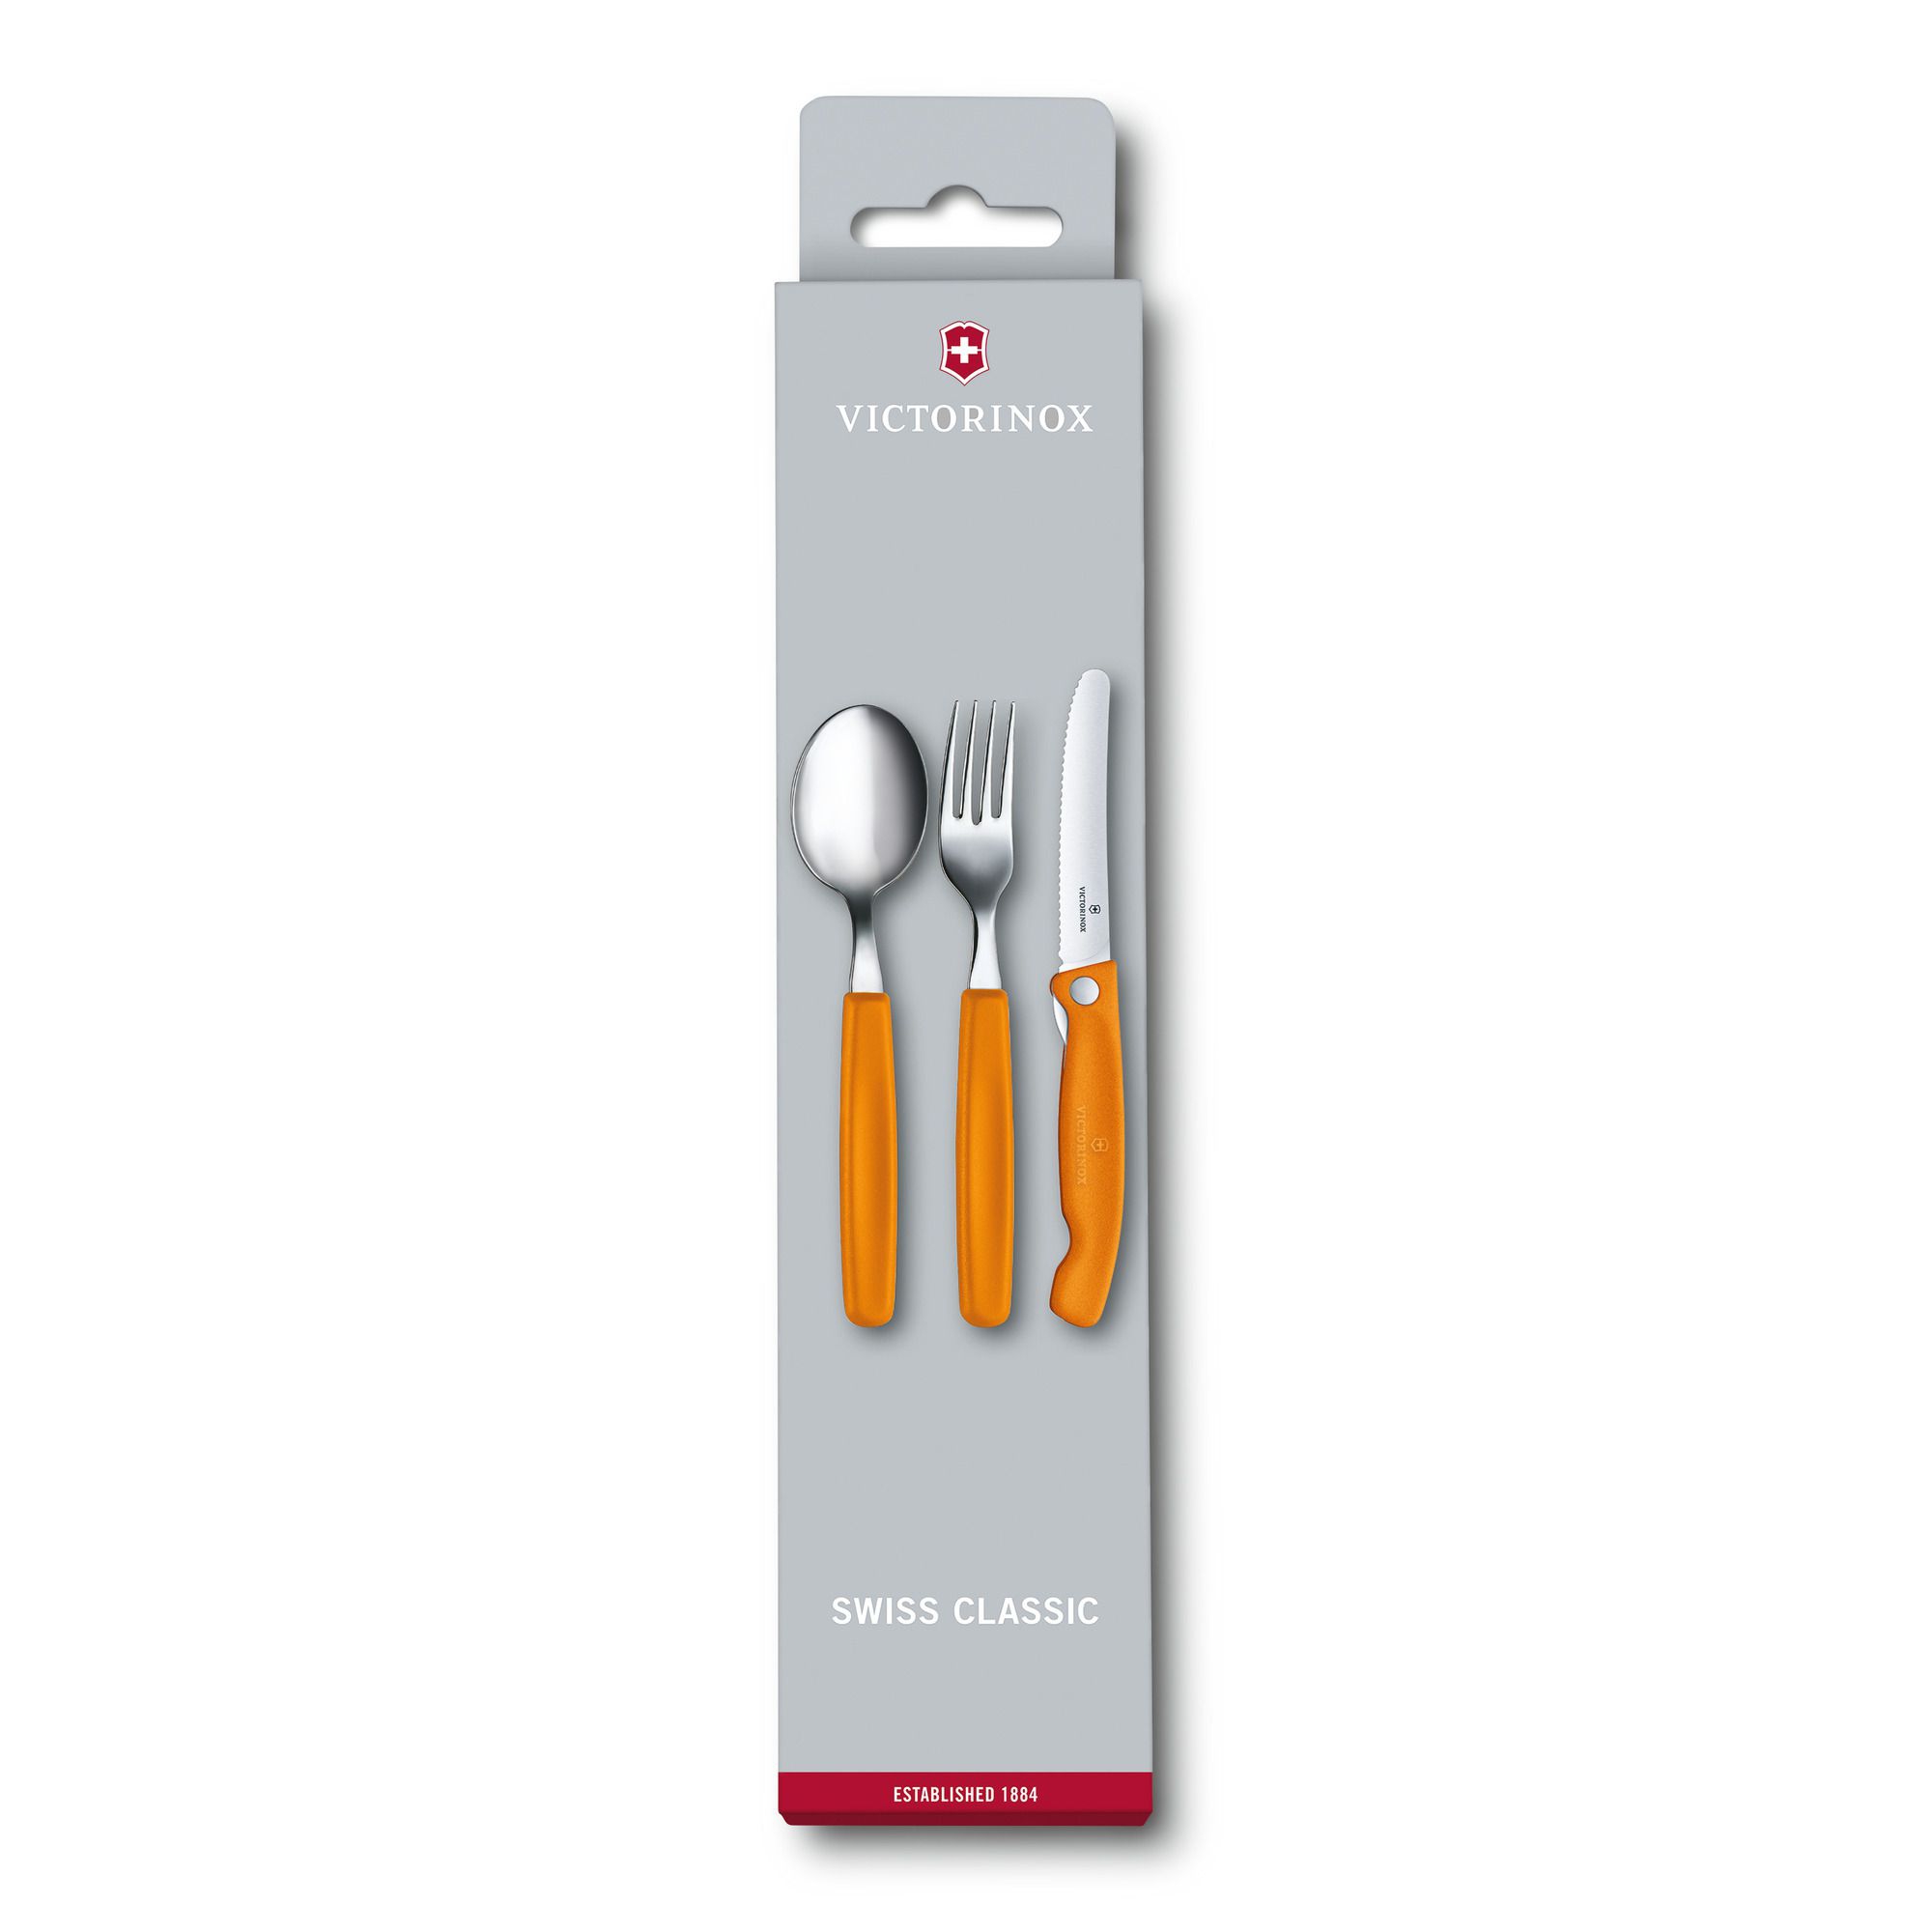 Victorinox - Swiss Classic Set of vegetable knife, fork and spoon